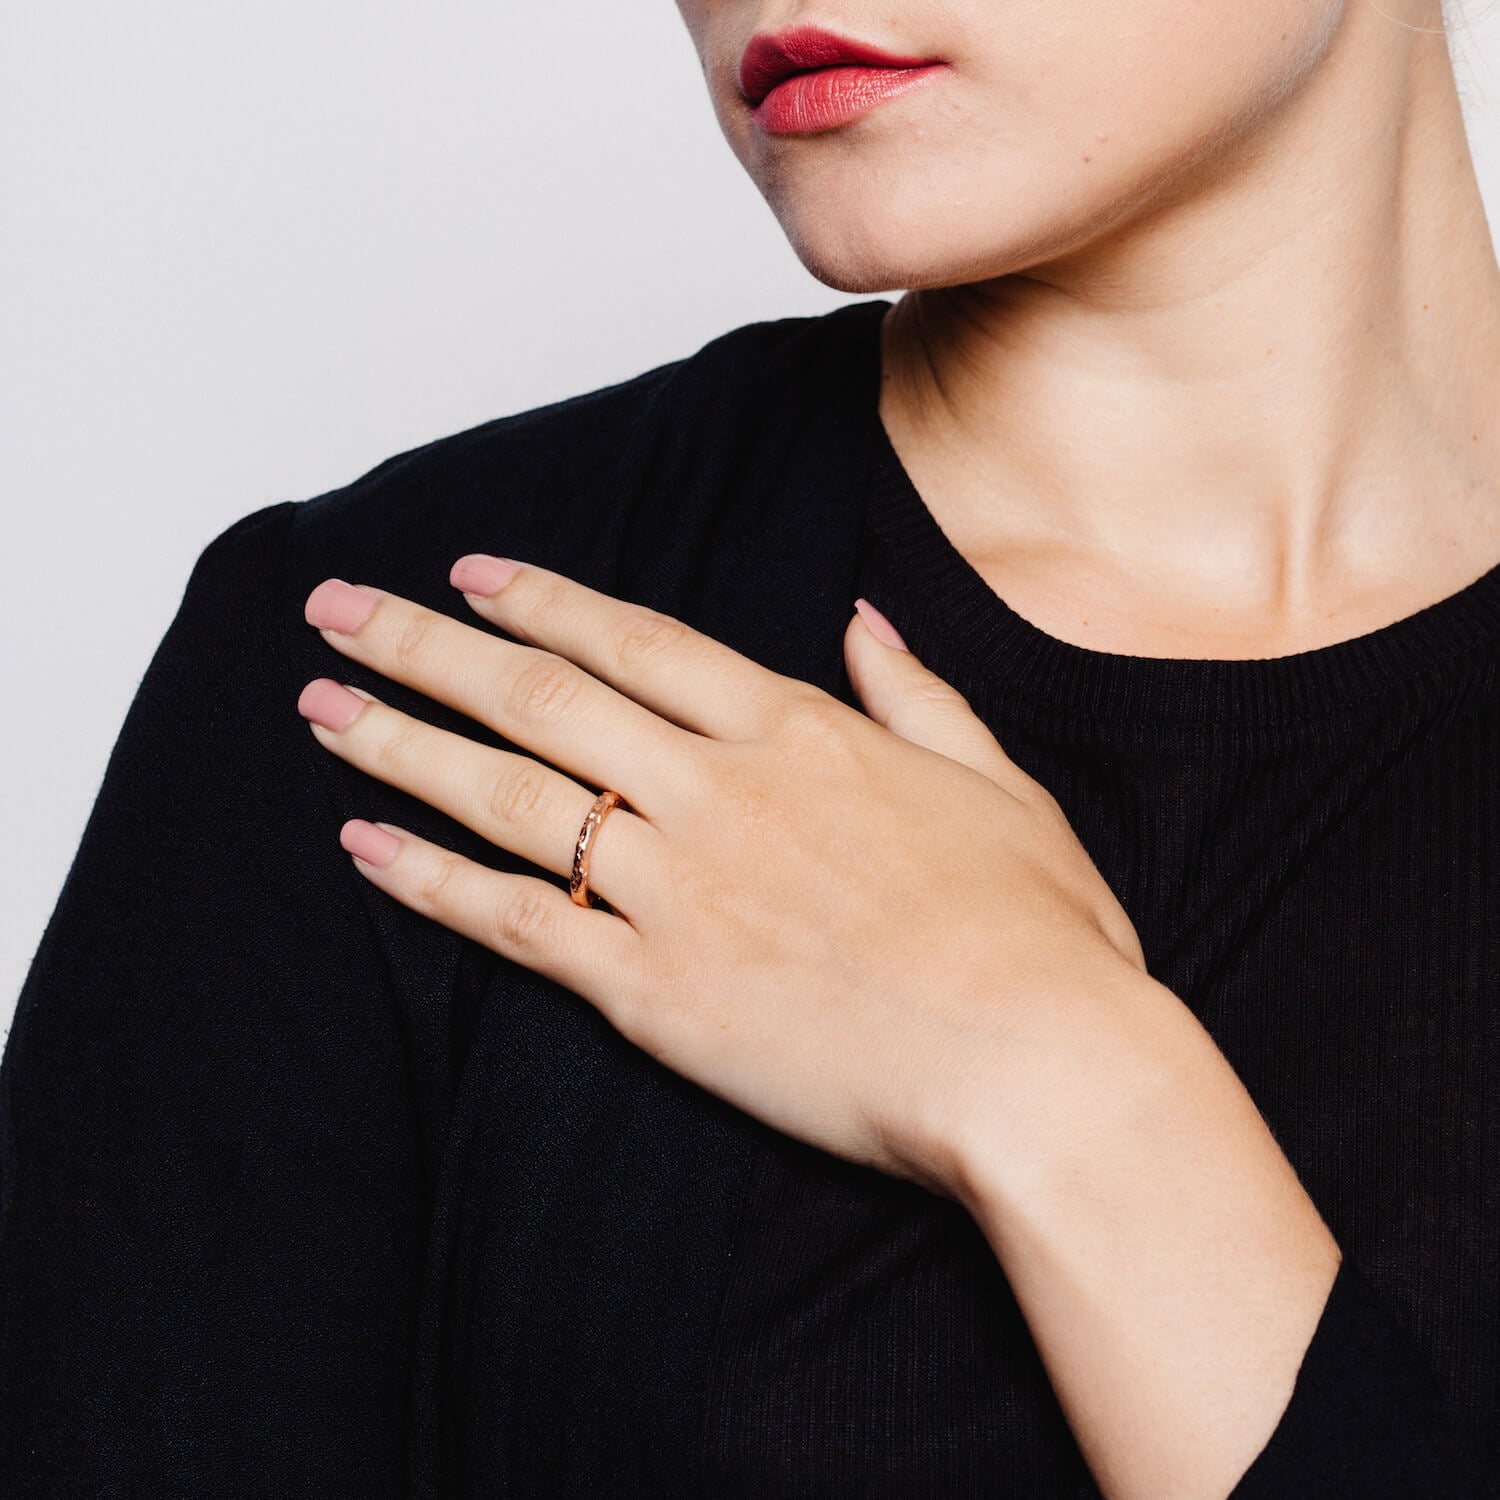 Model wearing rose gold textured ring with meteorite style details